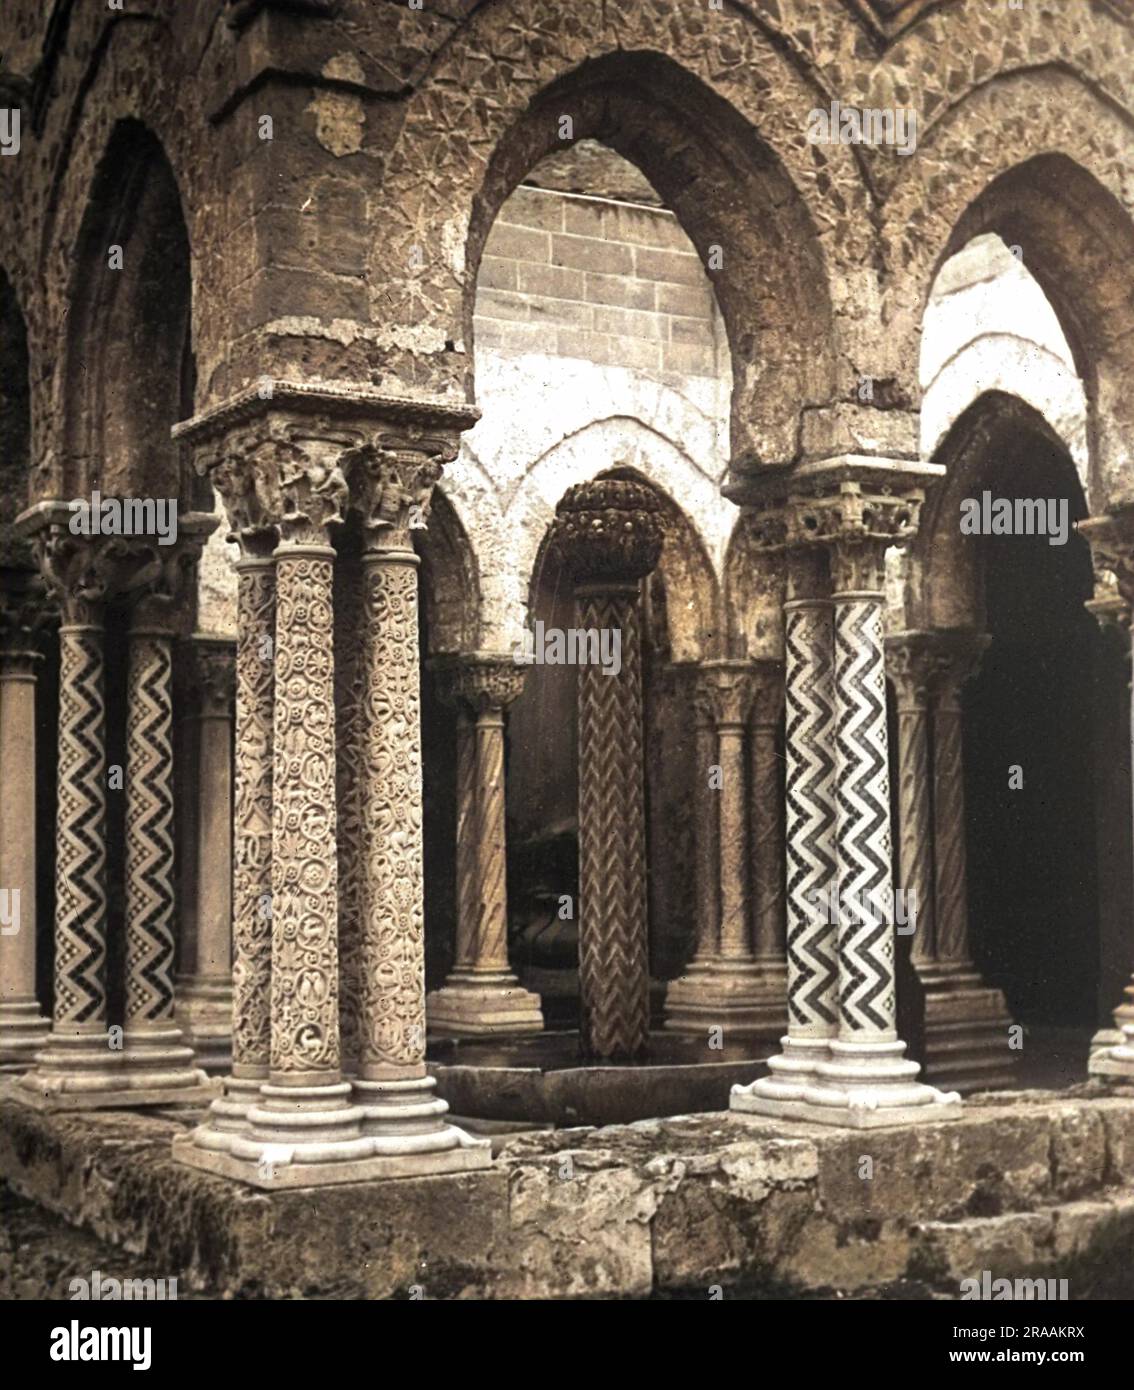 A fine example of cloister architecture with Gothic arches and thin patterned columns. The ante-chamber off the main cloister demarkates an area surrounding a fountain. The Cathedral of Monreale is one of the greatest extant examples of Norman architecture in the world. It was begun in 1174 by William II, and in 1182 the church, dedicated to the Assumption of the Virgin Mary, was, by a bull of Pope Lucius III, elevated to the rank of a metropolitan cathedral. The church is a national monument of Italy and one of the most important attractions of Sicily.     Date: circa 1904 Stock Photo